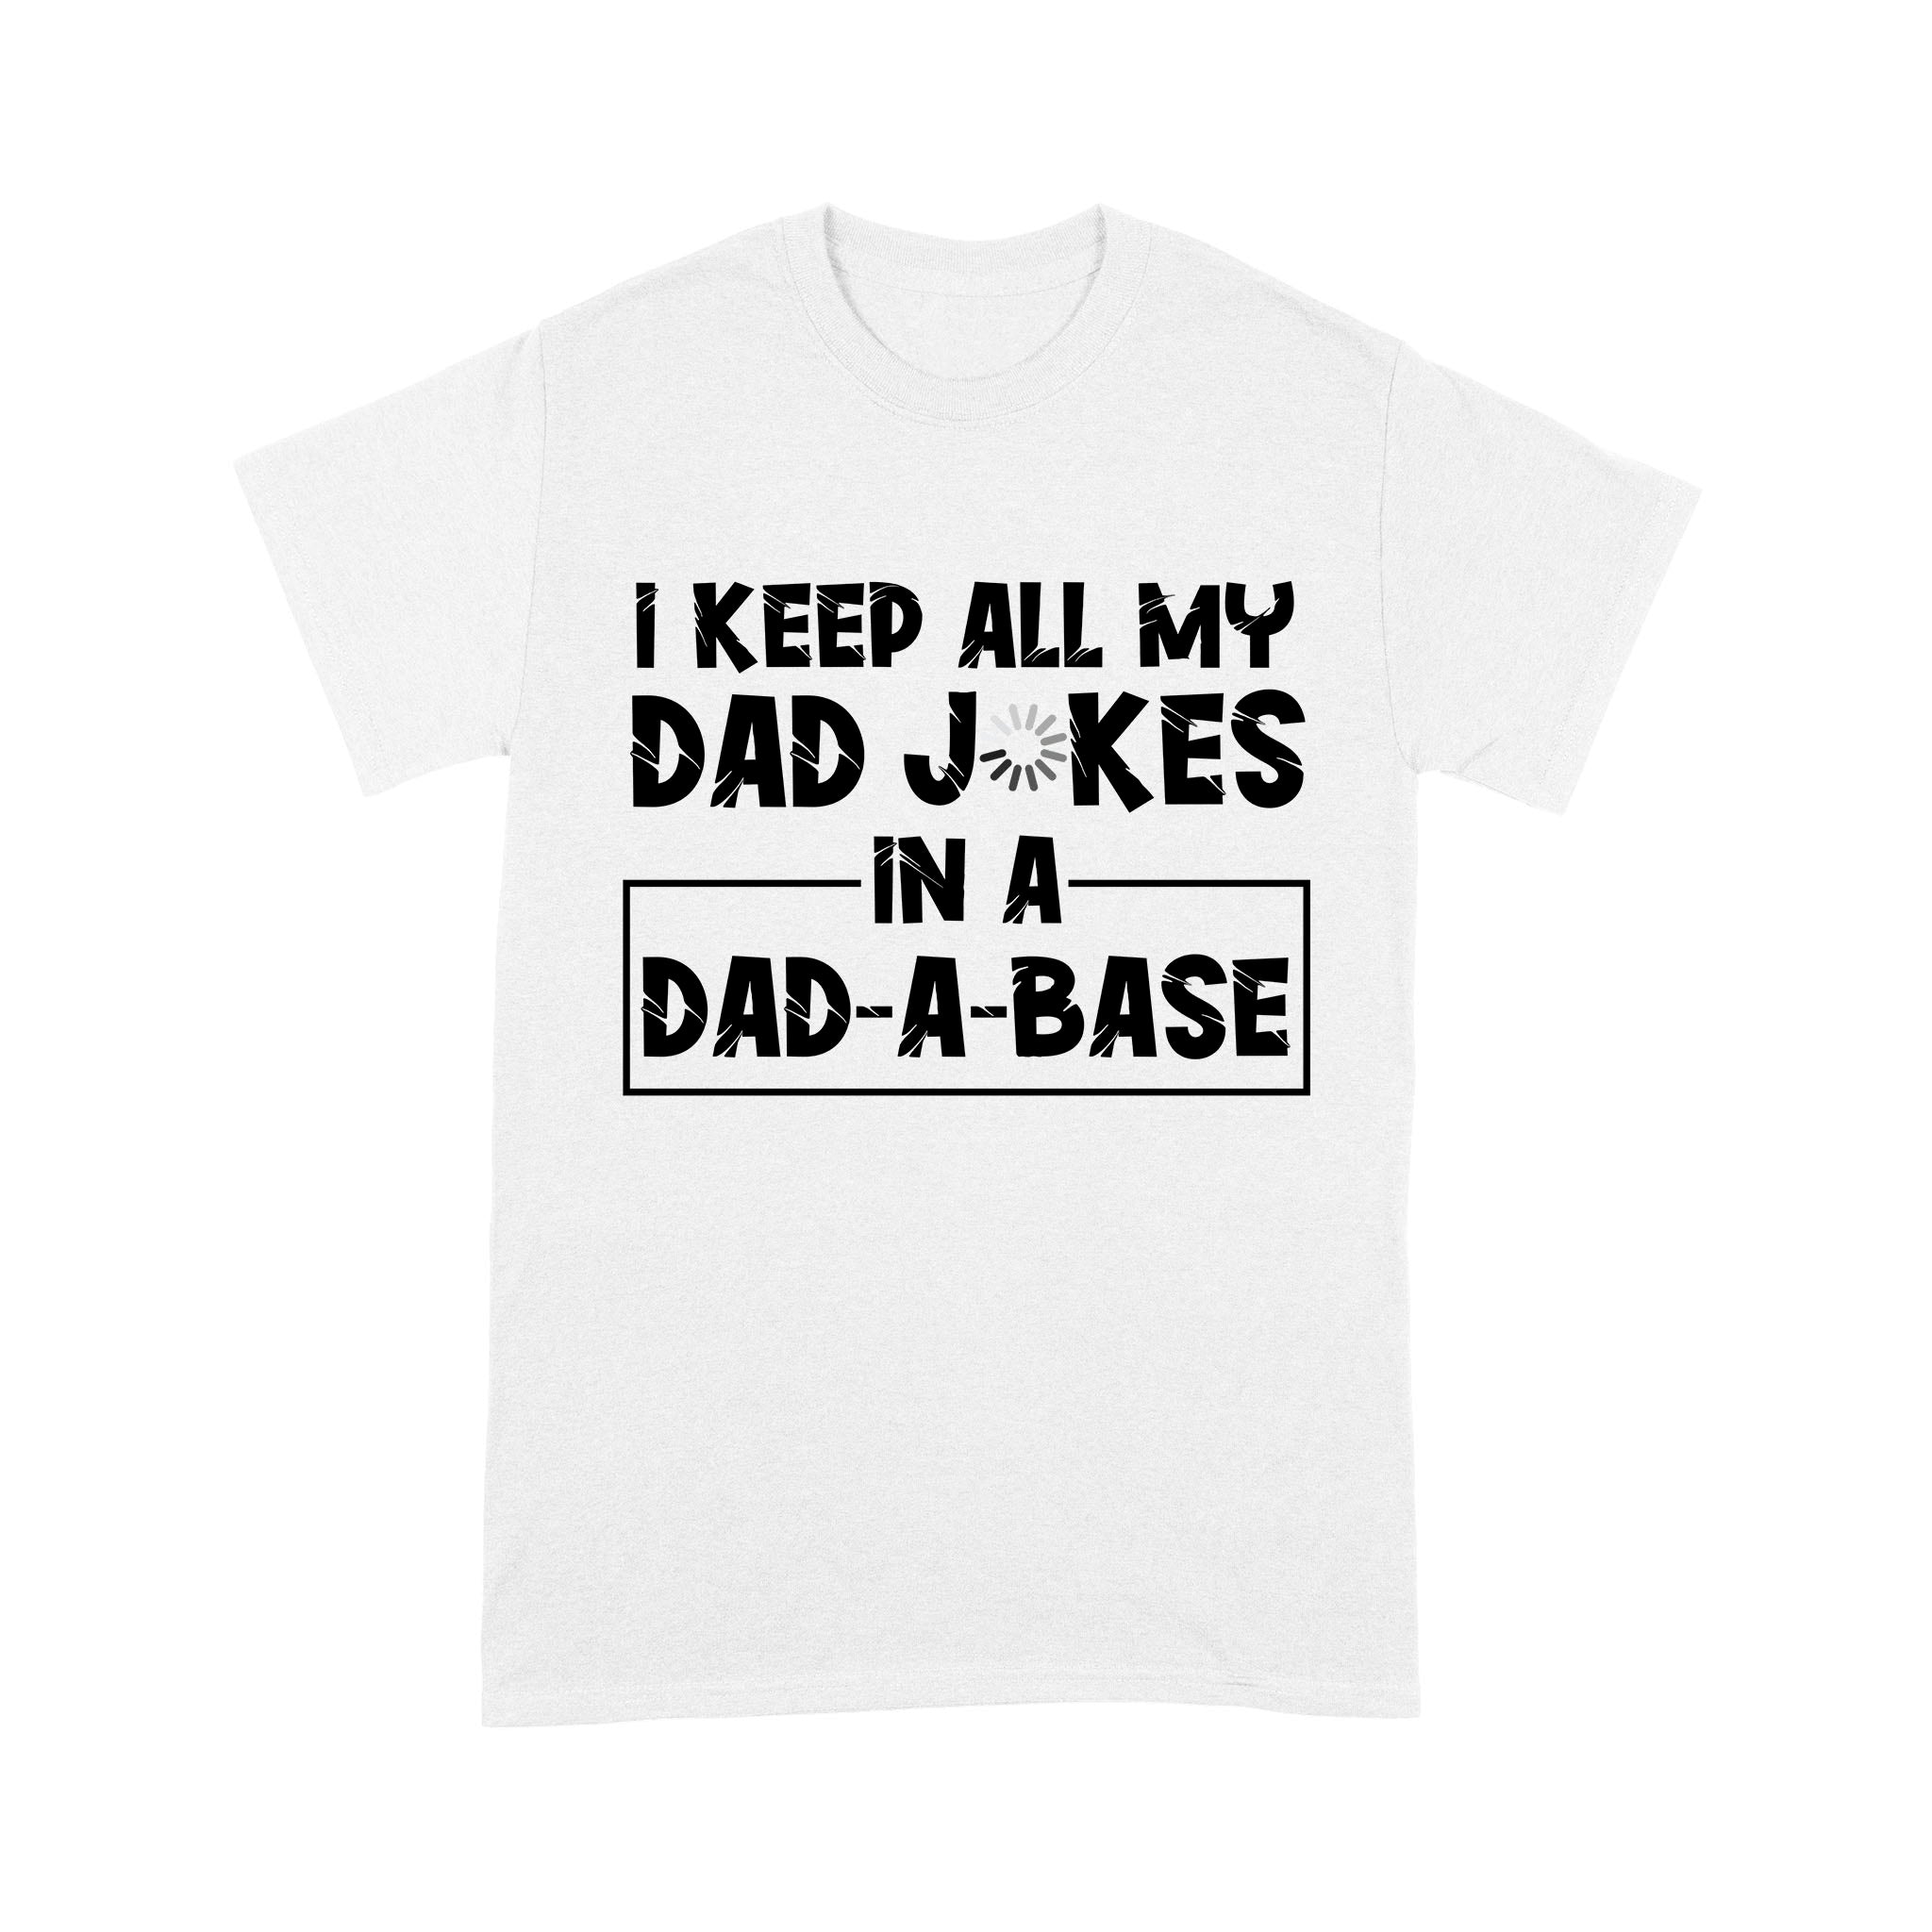 Funny Dad Jokes Shirt | I Keep All My Dad Jokes In A Dad-A-Base | Funny Dad Iokes | Father Day Gifts | Funny Gifts For Dad From Son Daughter In Birthday, Christmas | NS43 Myfihu